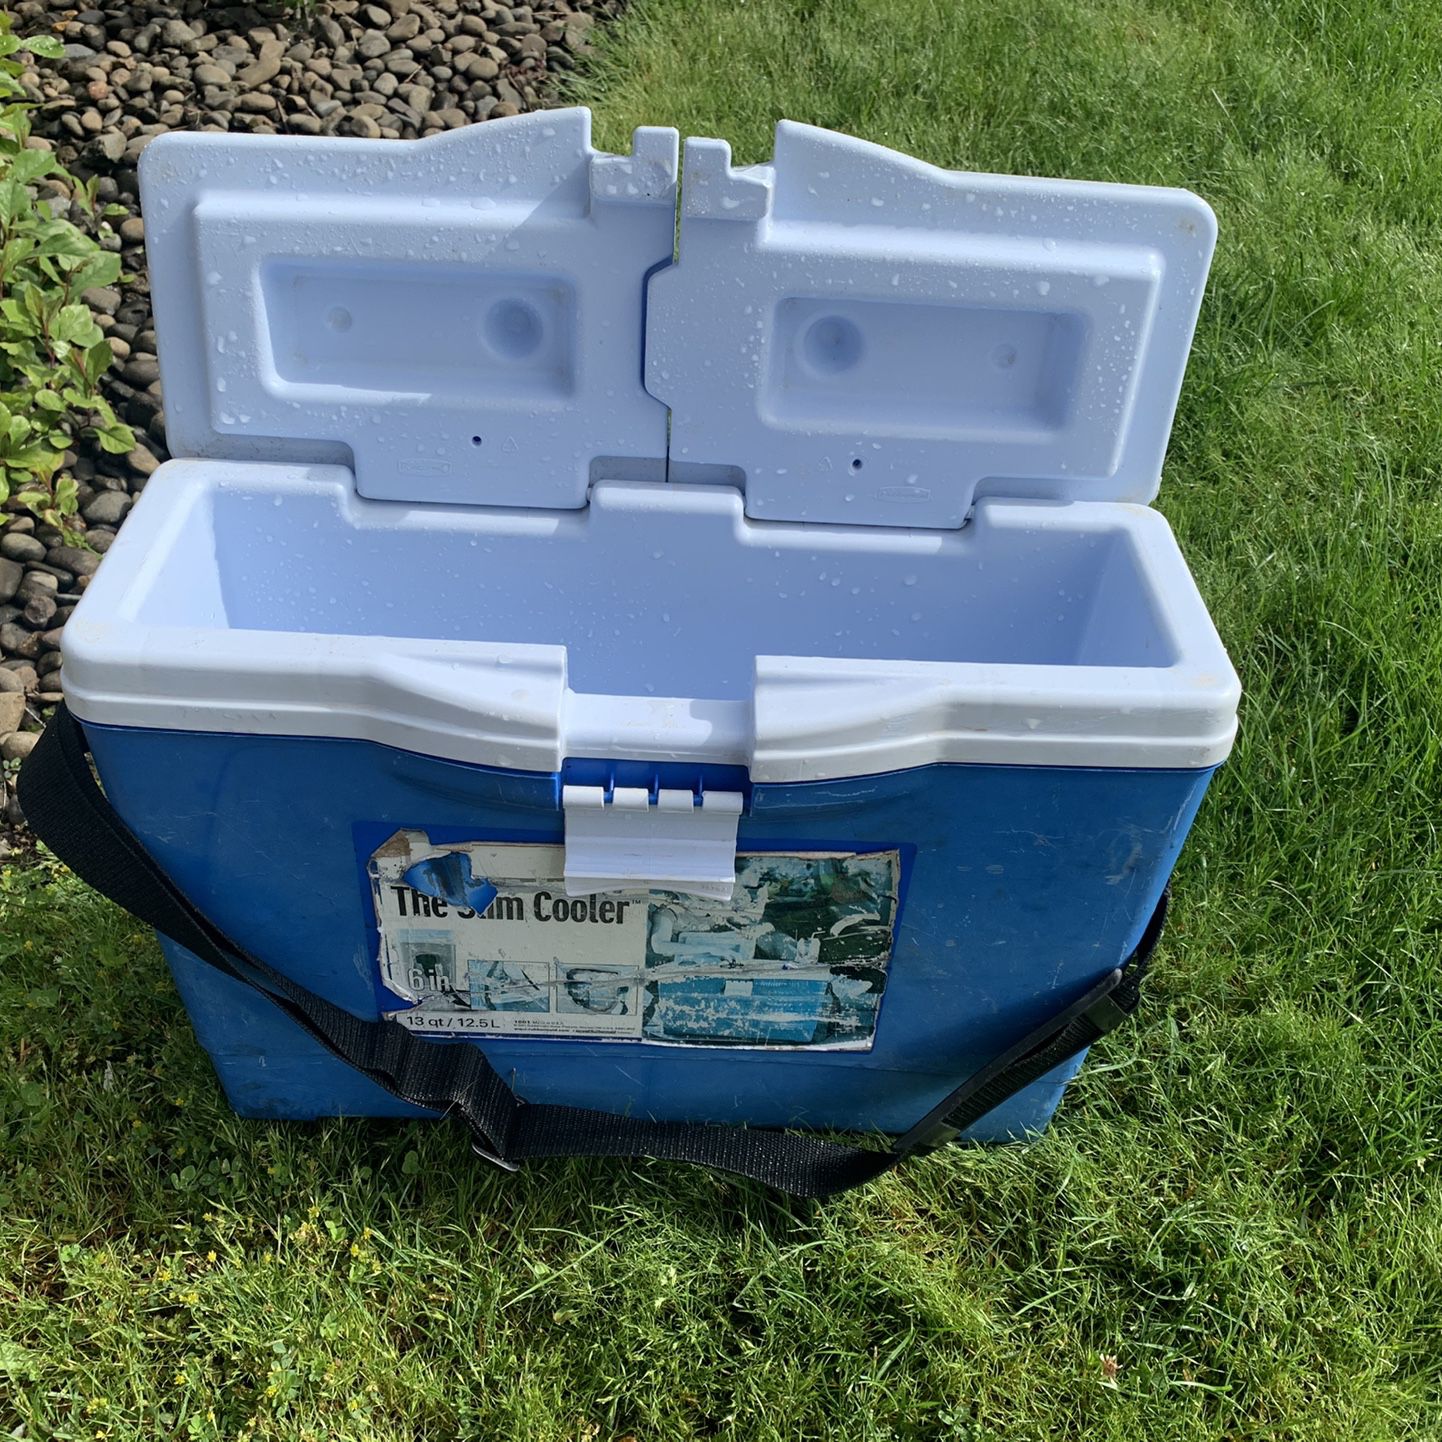 Rubbermaid Slim Cooler for Sale in Aurora, OR - OfferUp